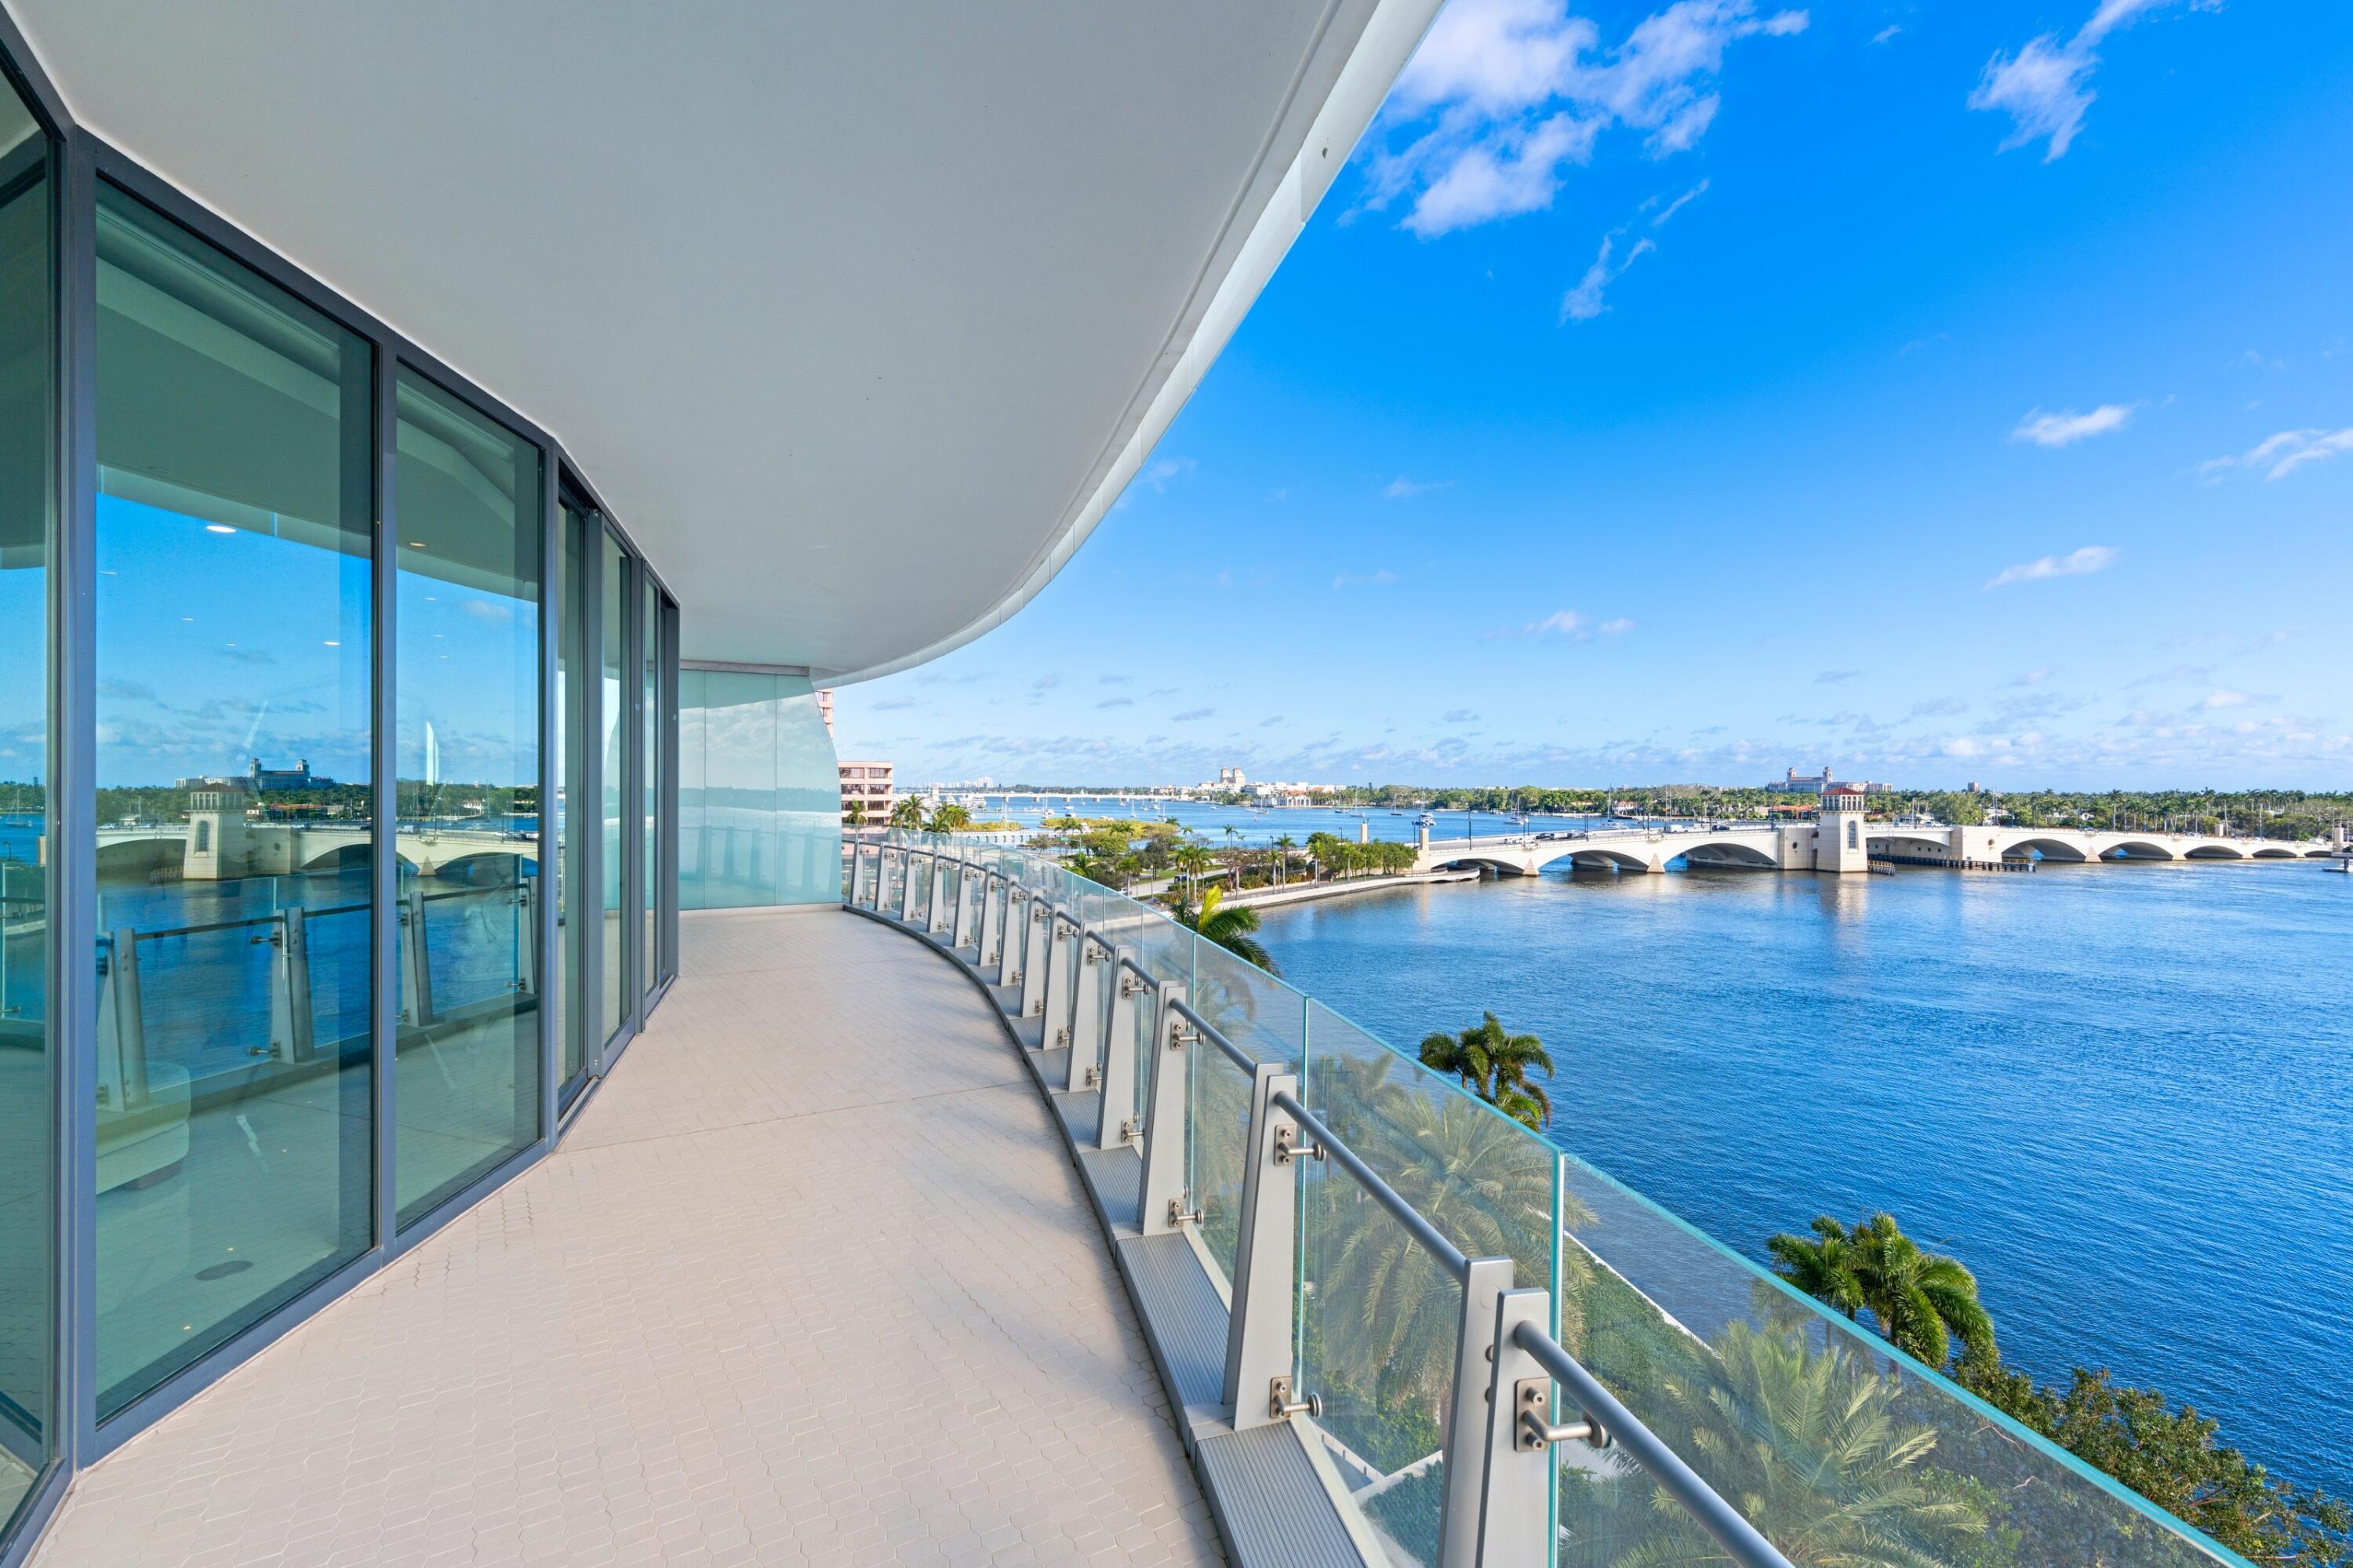 Welcome to The Bristol 602, the epitome of South Florida luxury living overlooking the beautiful Intracoastal waterway and Palm Beach Island. Boasting 4308 total square feet of living space, high ceilings throughout, 3BRs + den, and 3.5BA's, this pristine, turn-key unit is ready for to move into and immediately enjoy. Featuring cabinetry by Sneidero, calacatta and white diamond marble floors throughout, and Gaggenau appliances in the kitchen, this like-new residence offers stunning vistas of the water, the island, and downtown West Palm Beach at every turn. Indisputably the most luxury condominium building on the West Palm Beach waterfront, The Bristol provides all of the contemporary amenities of modern life with unmatched convenience and access to the prestigious and historically preserved Island of Palm Beach. Providing comforts and luxuries like a 24 hour concierge, 75 ft lap pool, jacuzzi , fitness center, Beauty Salon, full his &amp; her Spa and locker room with 2 massage stations, and Steam and Sauna, this community is simply unrivaled in the area.  Give yourself the true gift of joy this Holiday Season and start 2024 right in this immaculate condo which is the most accessible and best valued unit at the coveted and highly sought after Bristol.  Offered exclusively at $13,750,000. Your Palm Beaches dream is closer than you think.